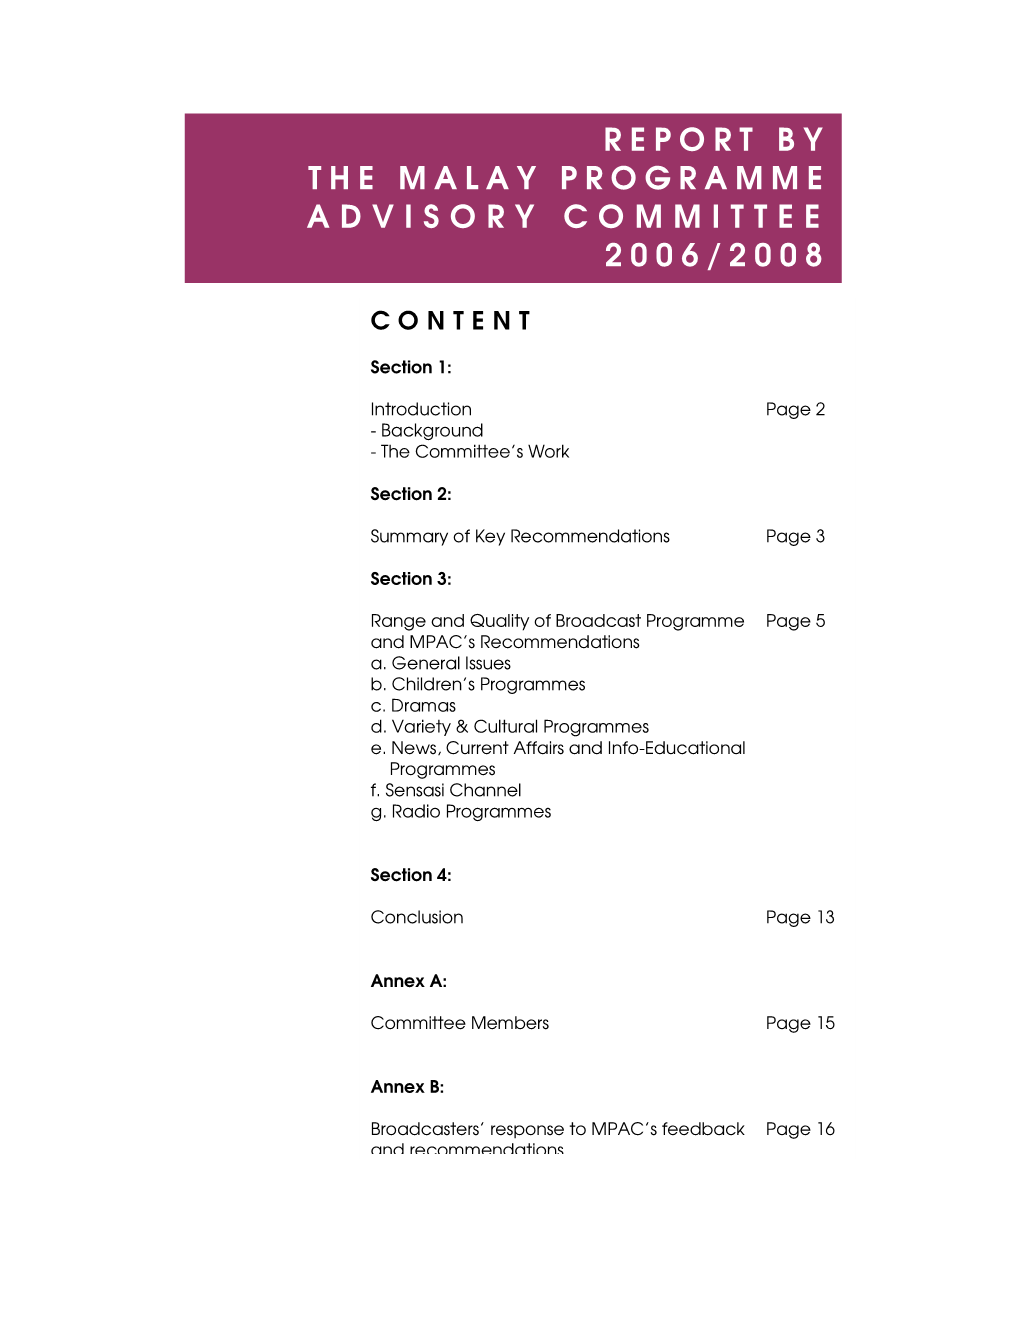 Report by the Malay Programme Advisory